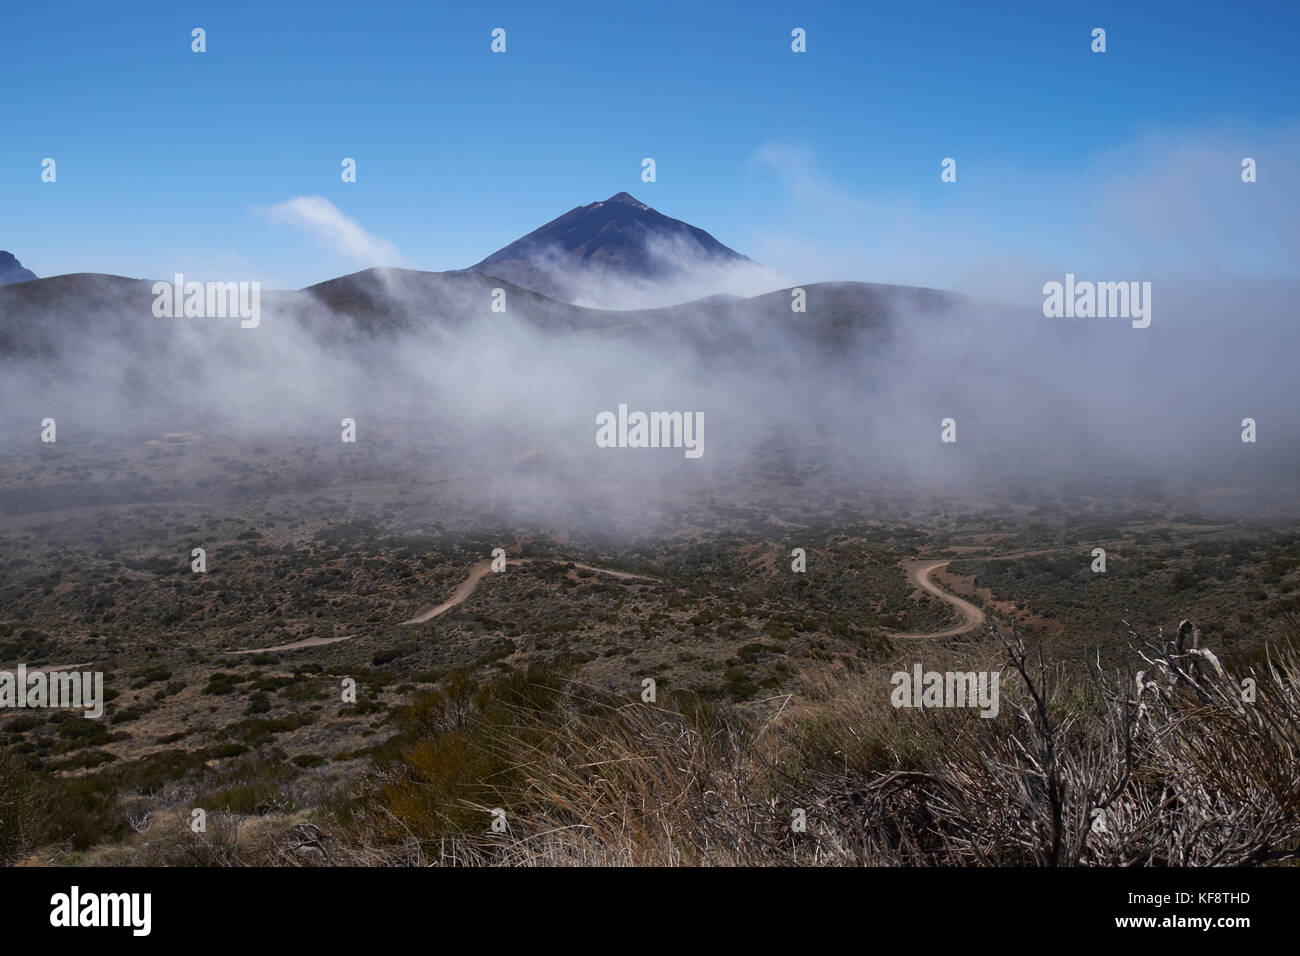 The peak of Mount Teide rising above low cloud. Teide National Park, Tenerife, Canary Islands, Spain. Stock Photo